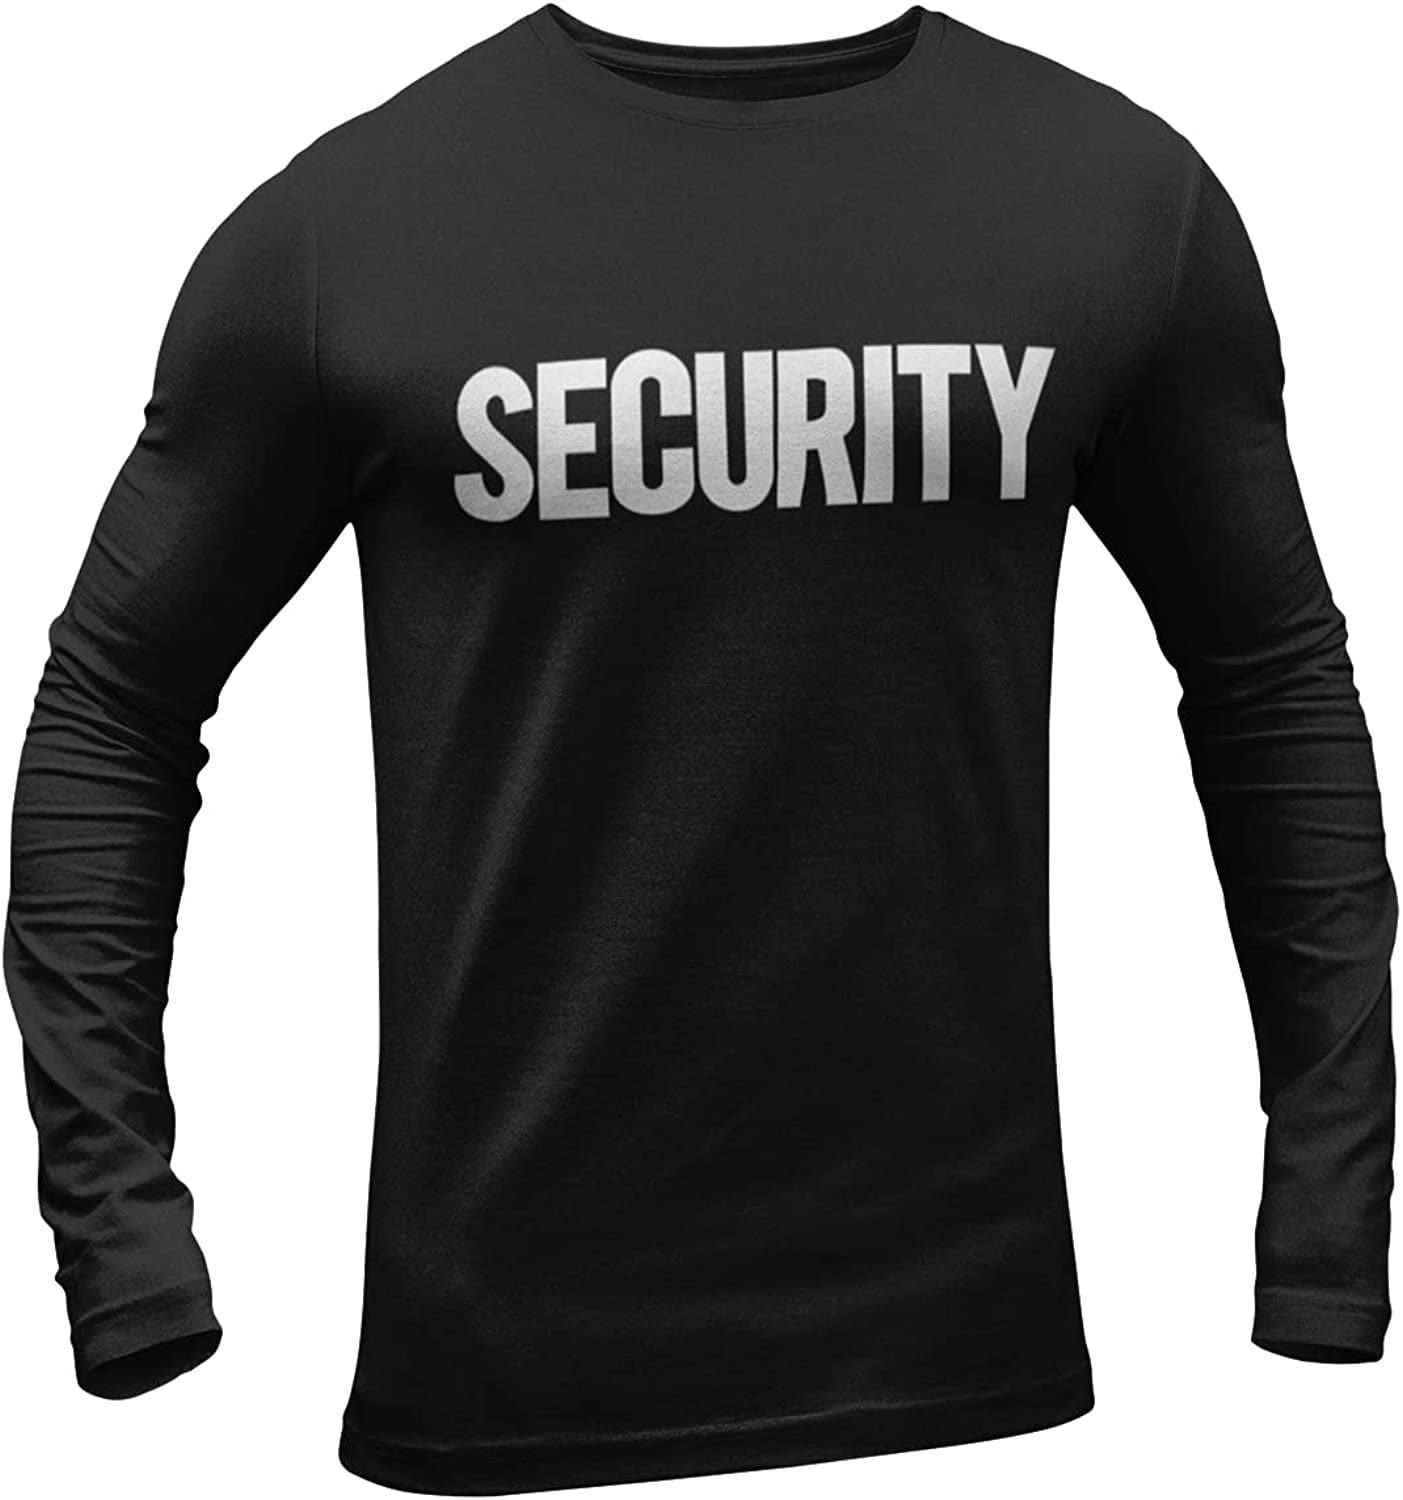 NYC Factory Men's Long Sleeve Security T-Shirt Bright & Bold Screen ...